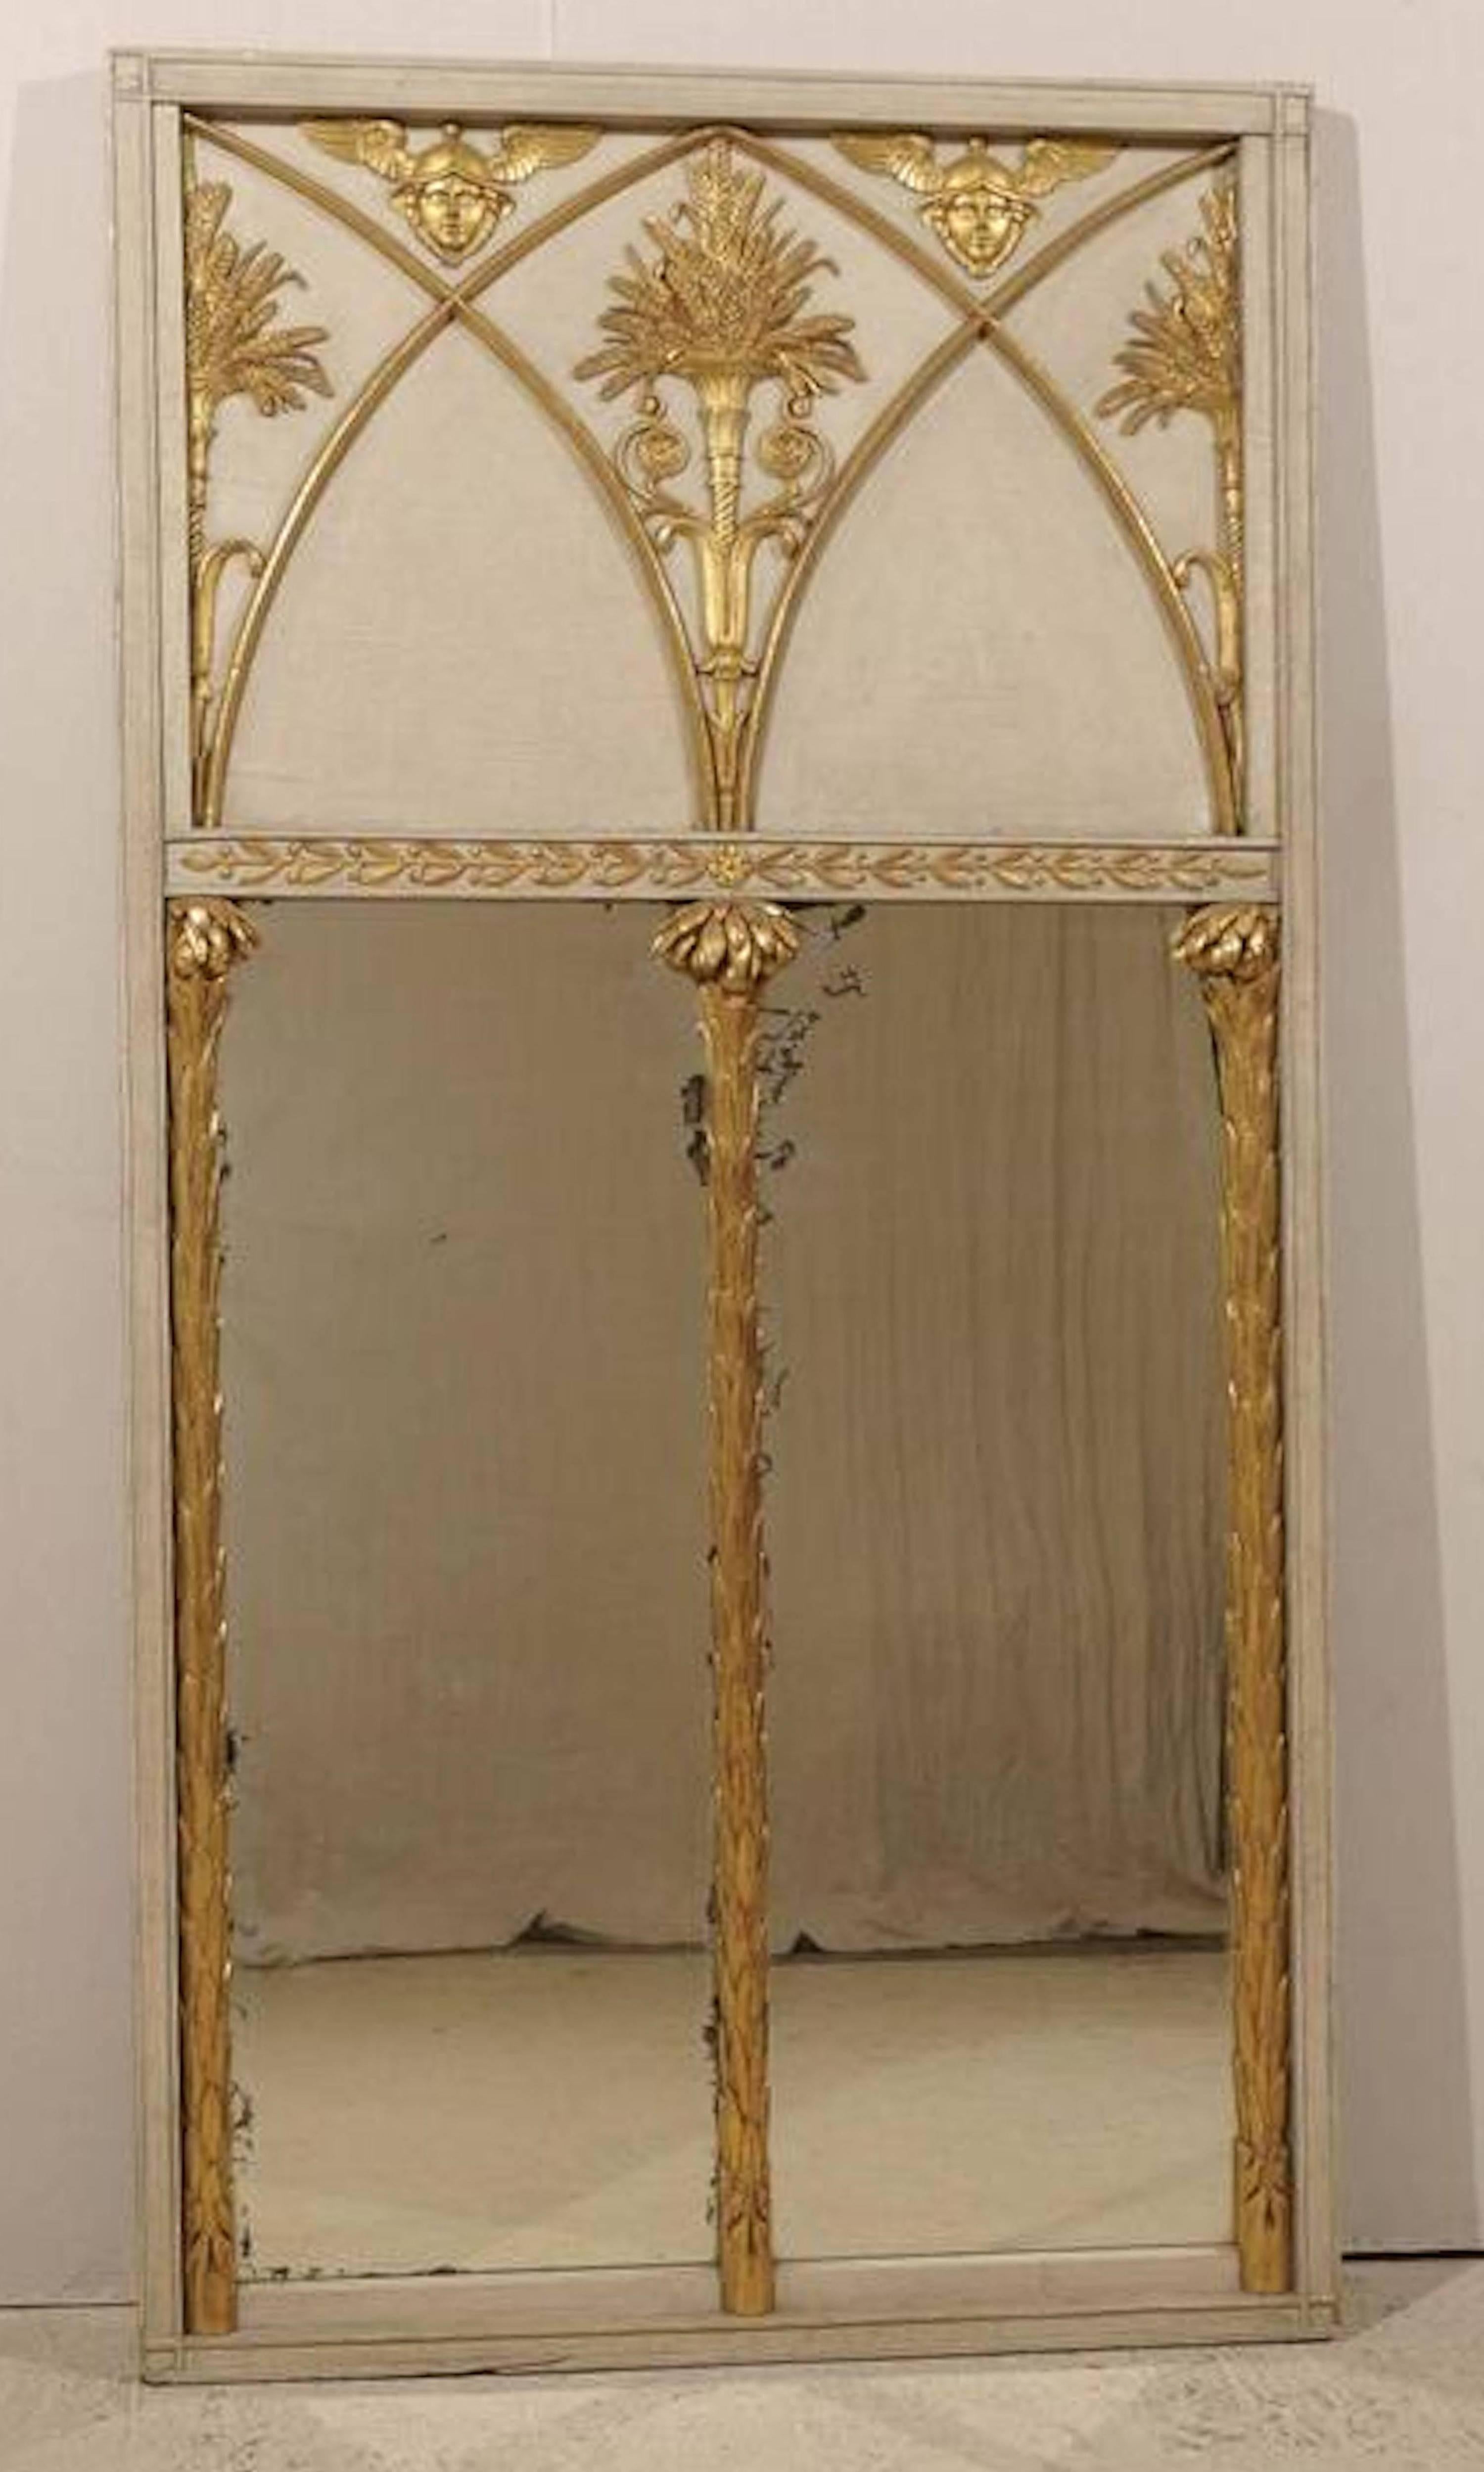 Exceptional and unusual French Directoire period trumeau mirror of monumental scale having original painted and parcel-gilt frame with neoclassical and foliate ormolu appliqués in the forms of winged Mercury heads, wheat-sheaves, and flowering